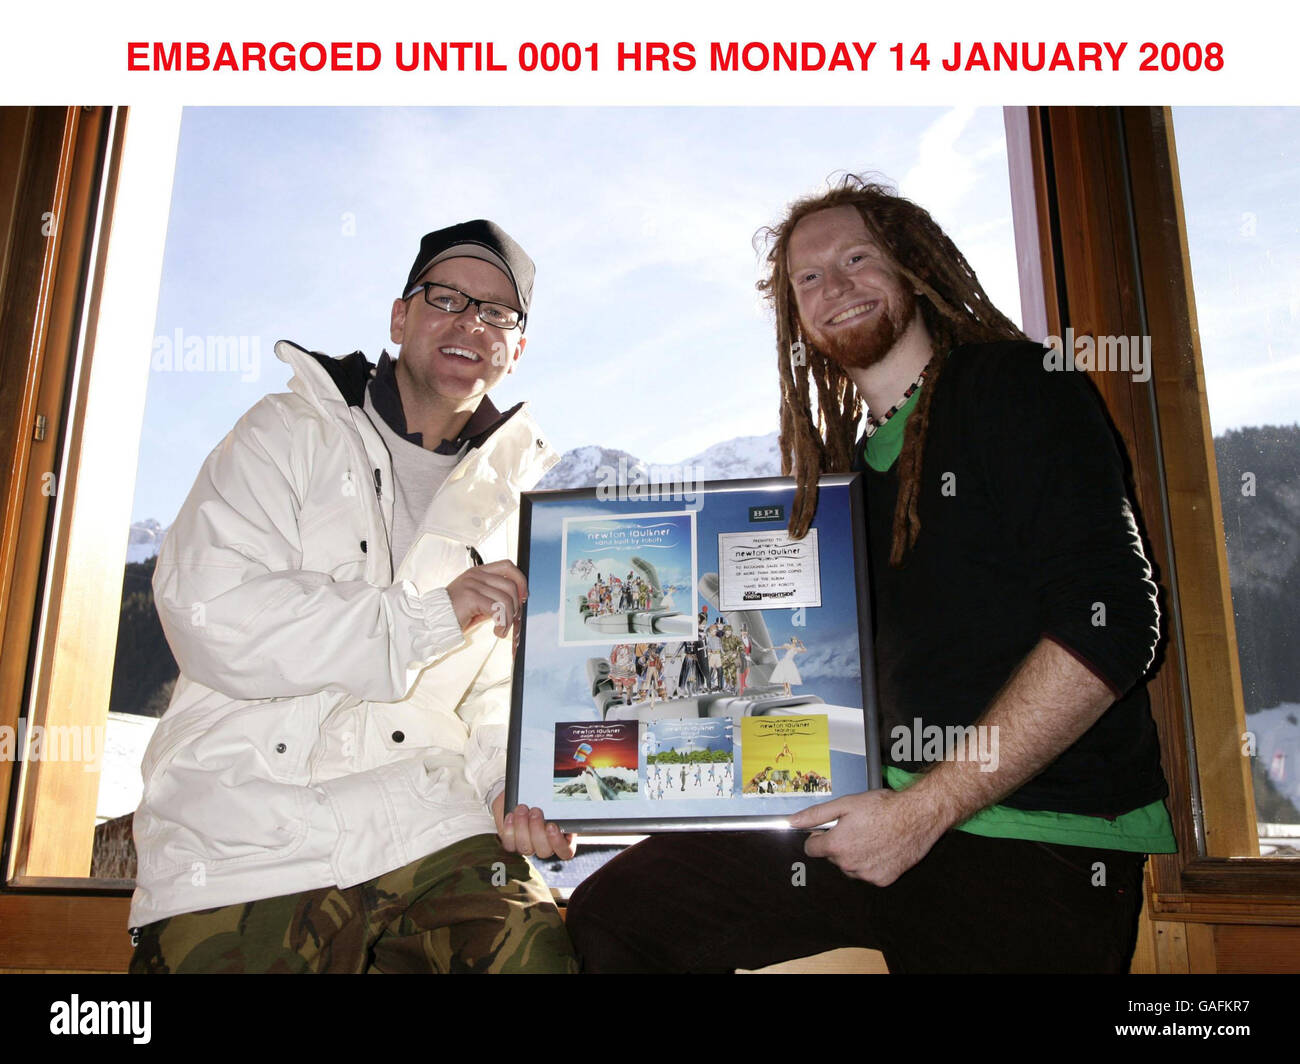 Singer-songwriter Newton Faulkner (right) is presented with a platinim gold disc by Virgin Radio DJ Ben Jones (marking half a million sales of his album 'Hand Built by Robots'), after performing a Virgin Radio session gig in a hot air balloon thousands of feet above the Swiss Alps, near Gruyere, Switzerland. Stock Photo